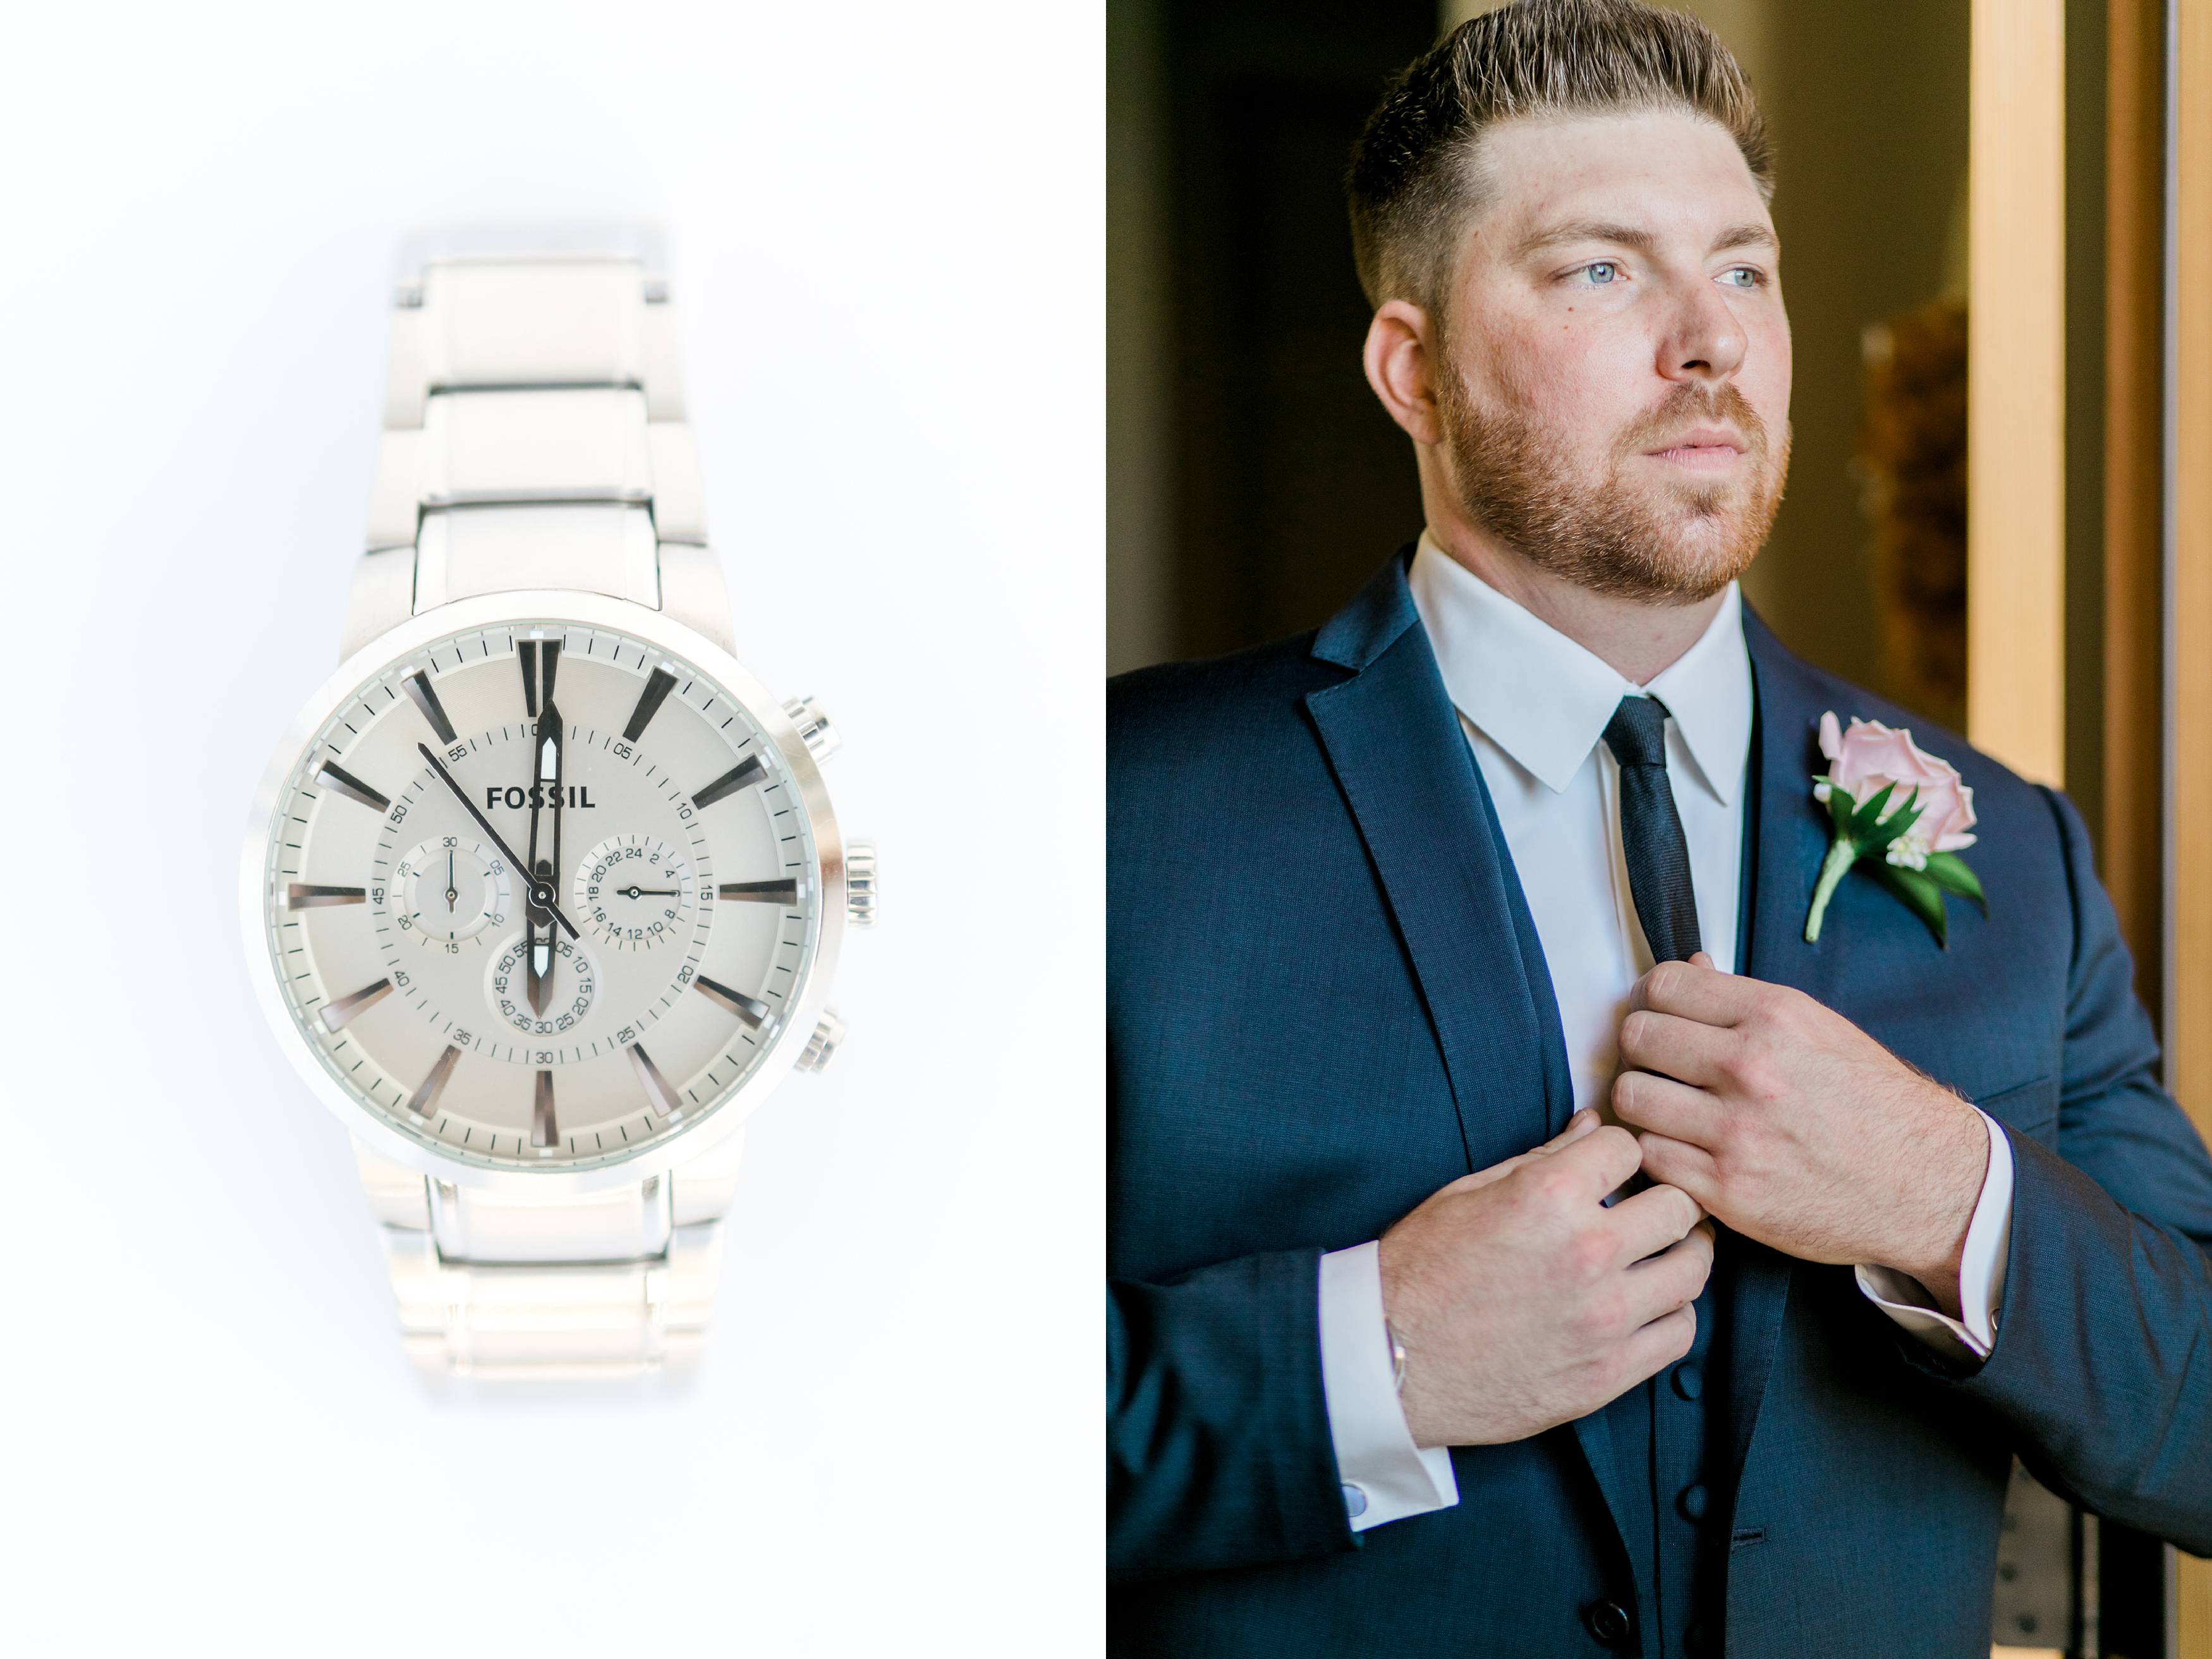 Groom wedding details with white fossil watch and blue suit